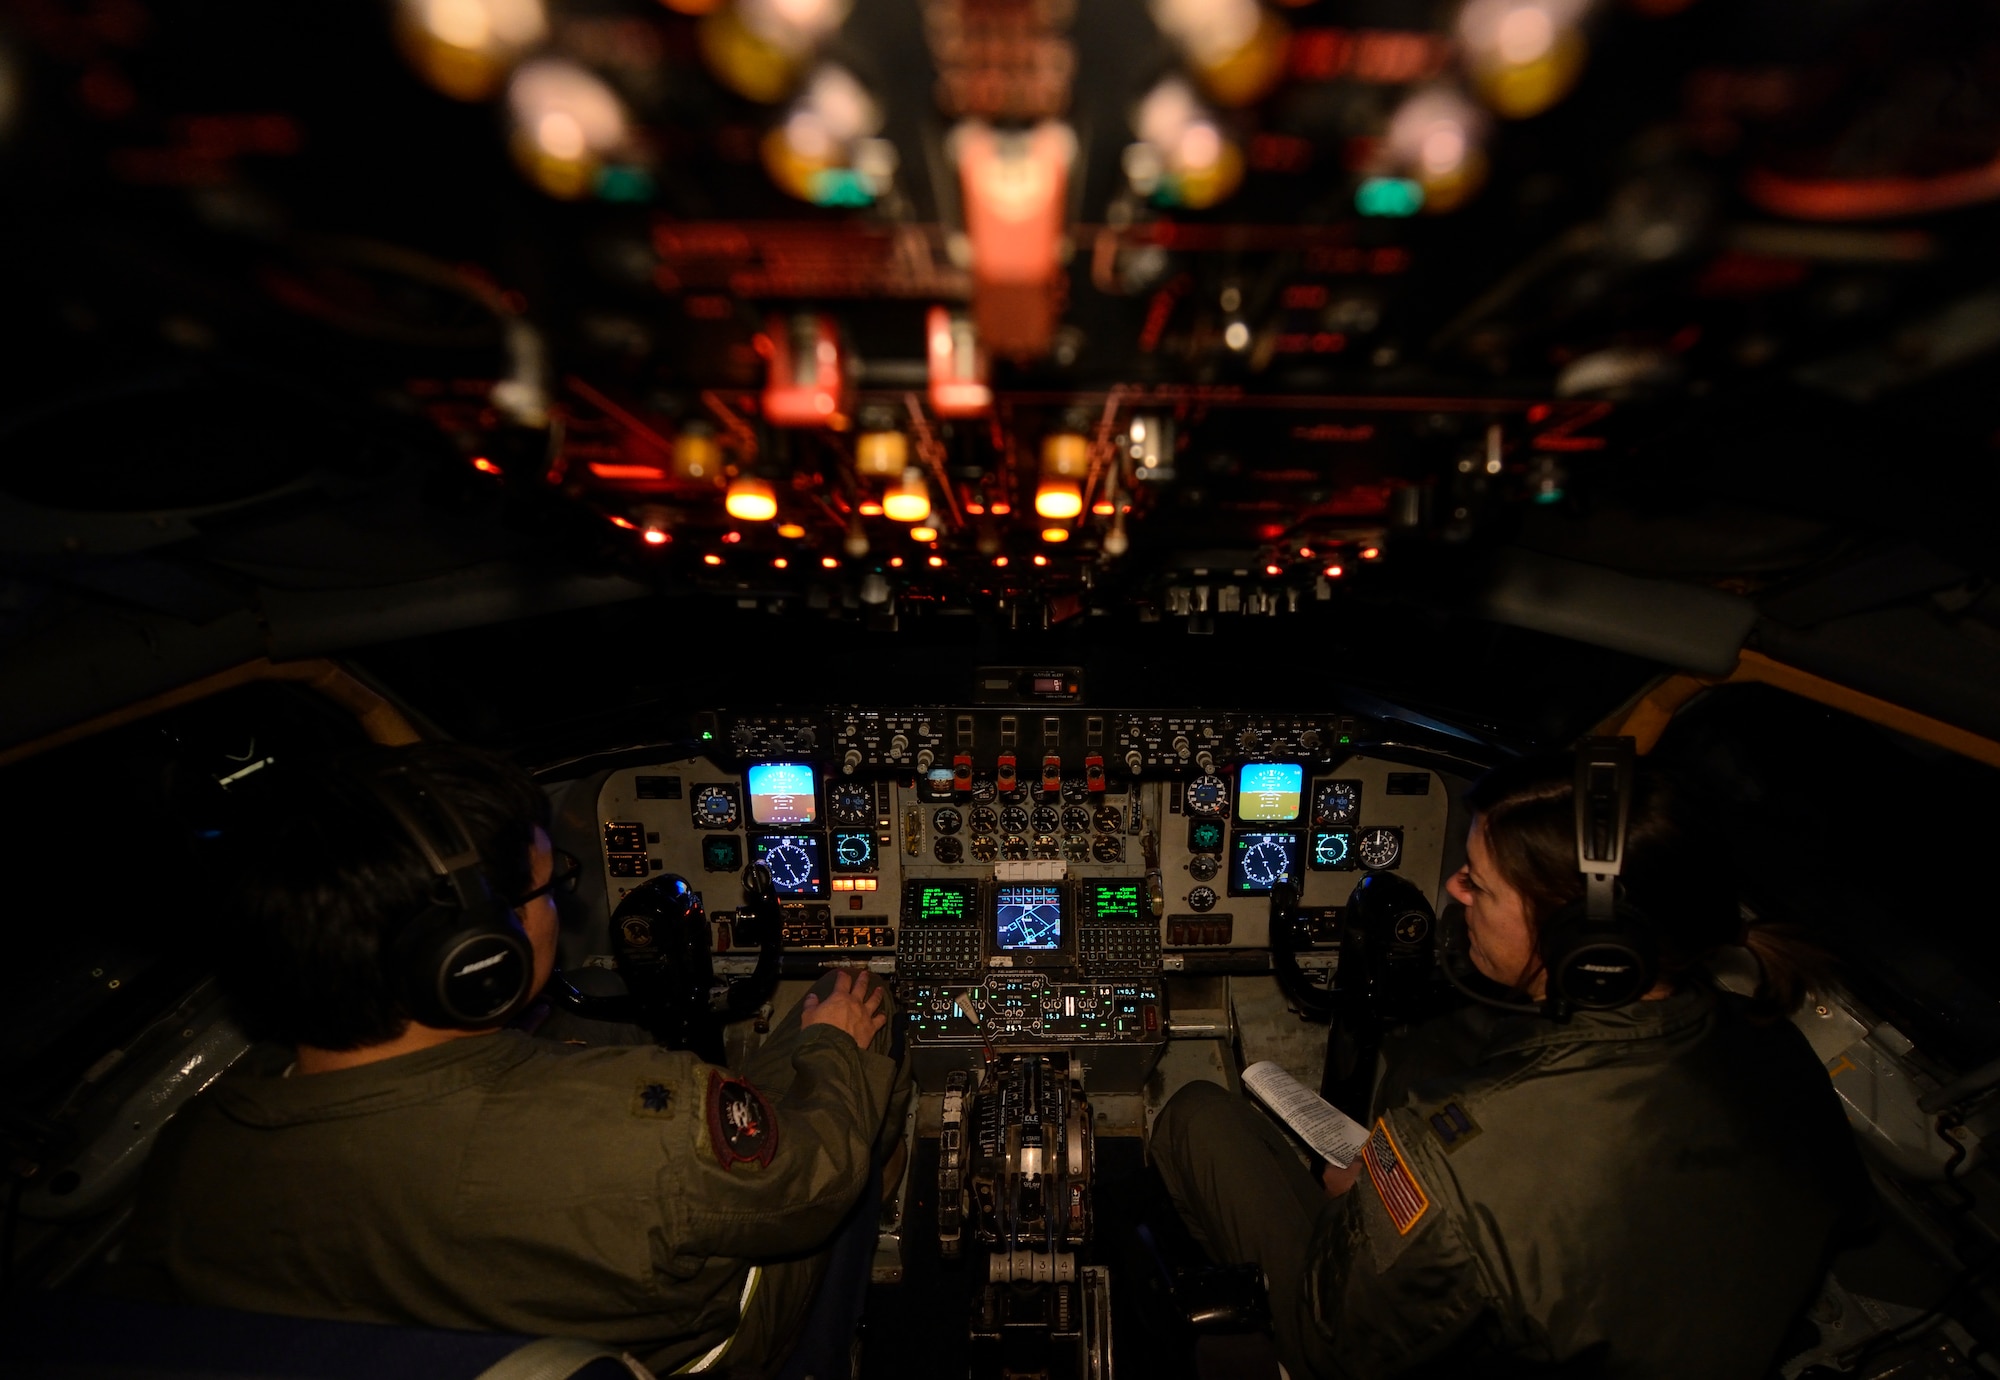 U.S. Air Force Lt. Col. Young Kim, left, and Capt. Shannon Callan, both KC-135 Stratotanker pilots assigned to the 63rd Air Refueling Squadron, 927th Operations Group at MacDill Air Force Base, Fla., begin their preflight checklist during a flying training deployment at Souda Bay, Greece, Feb. 2, 2016. The KC-135 is here in support of the 480th Expeditionary Fighter Squadron’s FTD. The aircraft conducted the training as part of bilateral deployment between Greek and U.S. air forces to develop interoperability and cohesion between the partnering nations. (U.S. Air Force photo by Staff Sgt. Christopher Ruano/Released)